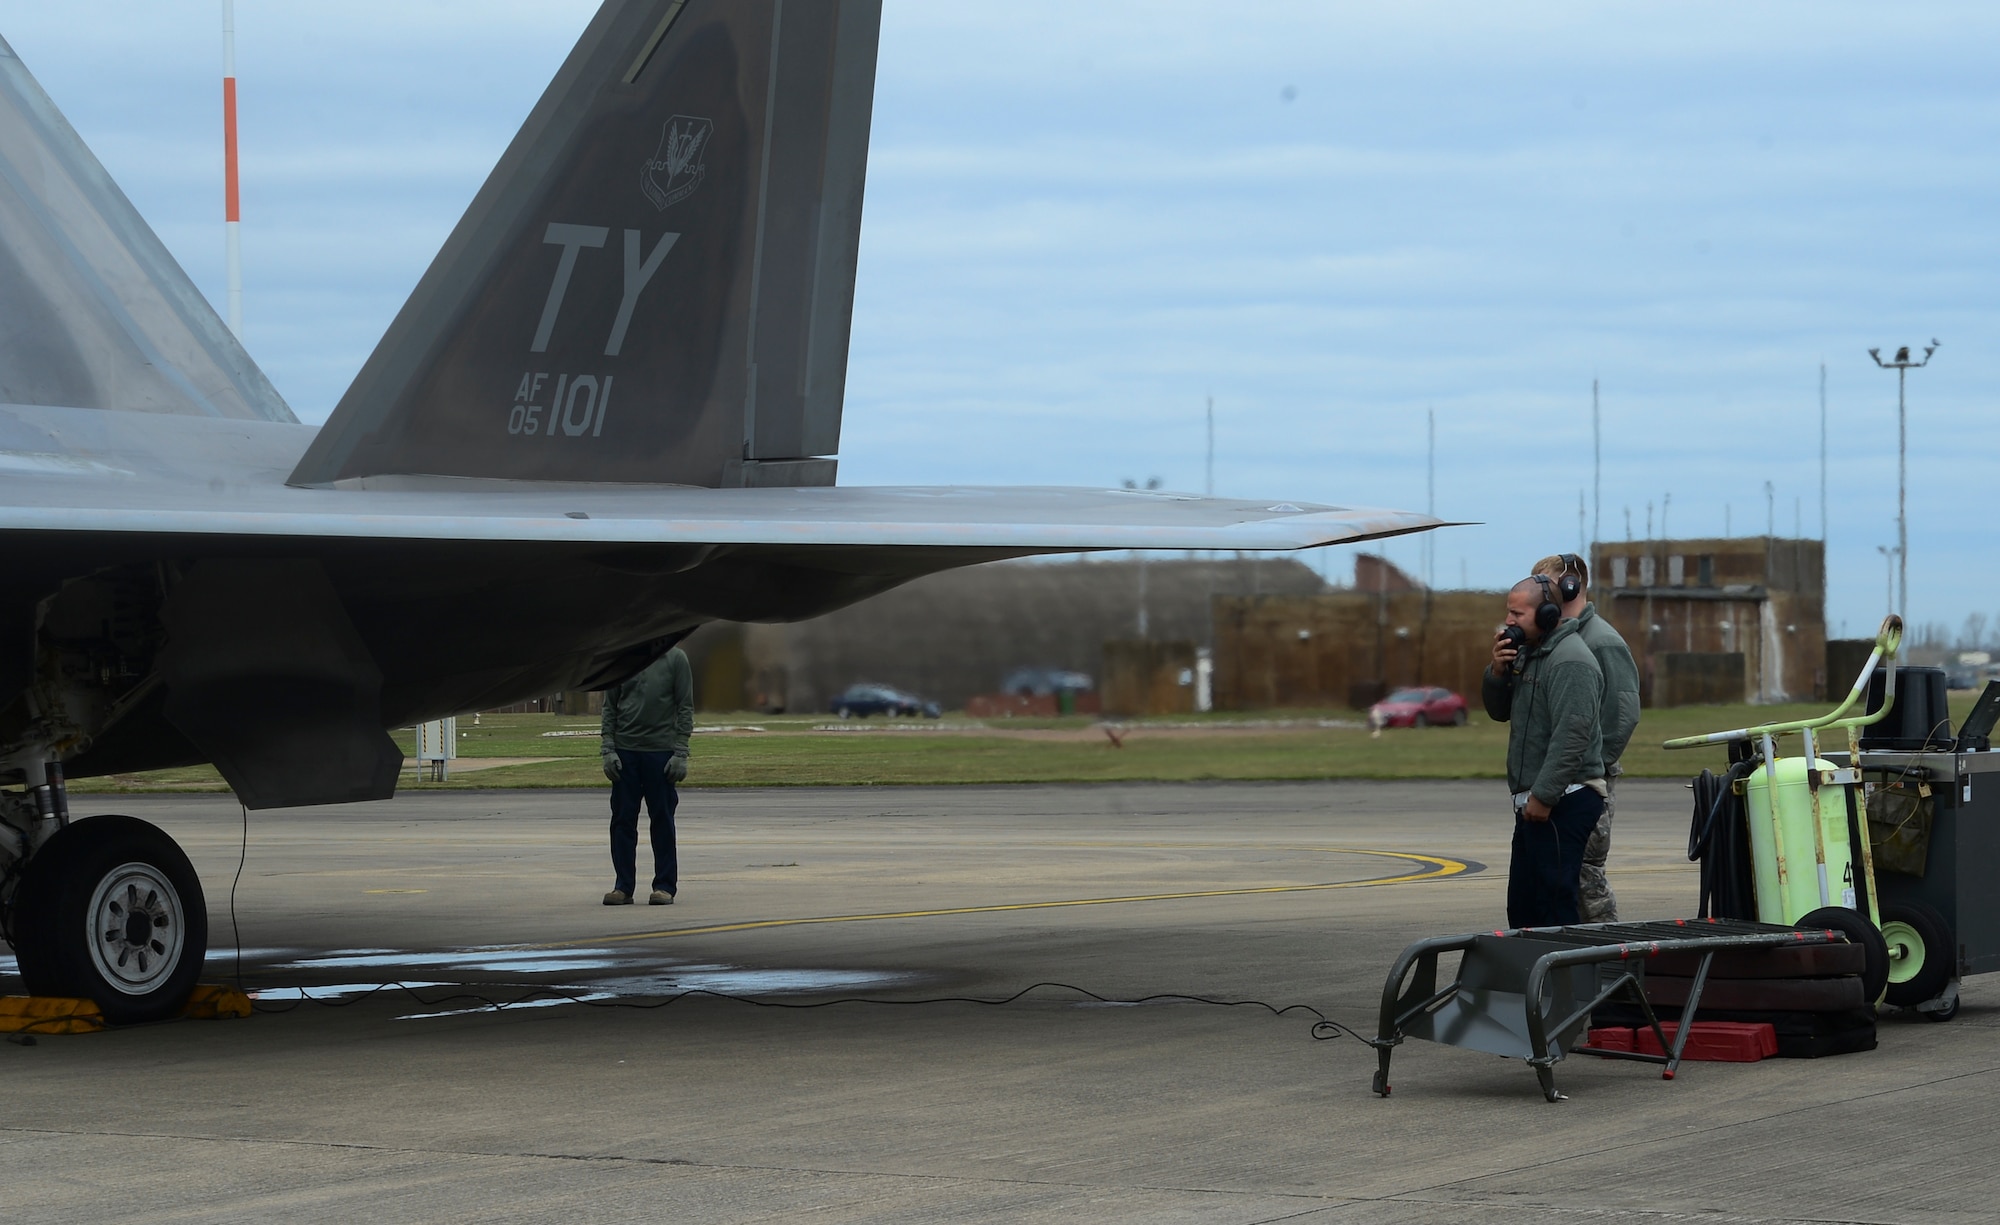 Maintenance Airmen assigned to the 325th Maintenance Squadron, Tyndall Air Force Base, Fla., communicate with an F-22 Raptor pilot before takeoff from Royal Air Force Lakenheath, England, April 18, 2016. The aircraft arrival marks the second time the U.S. European Command has hosted a deployment of F-22 aircraft in the EUCOM Area of Responsibility. This is the largest deployment of F-22’s to Europe and the first to the U.K. (U.S. Air Force photo by Senior Airman Dawn M. Weber/Released)